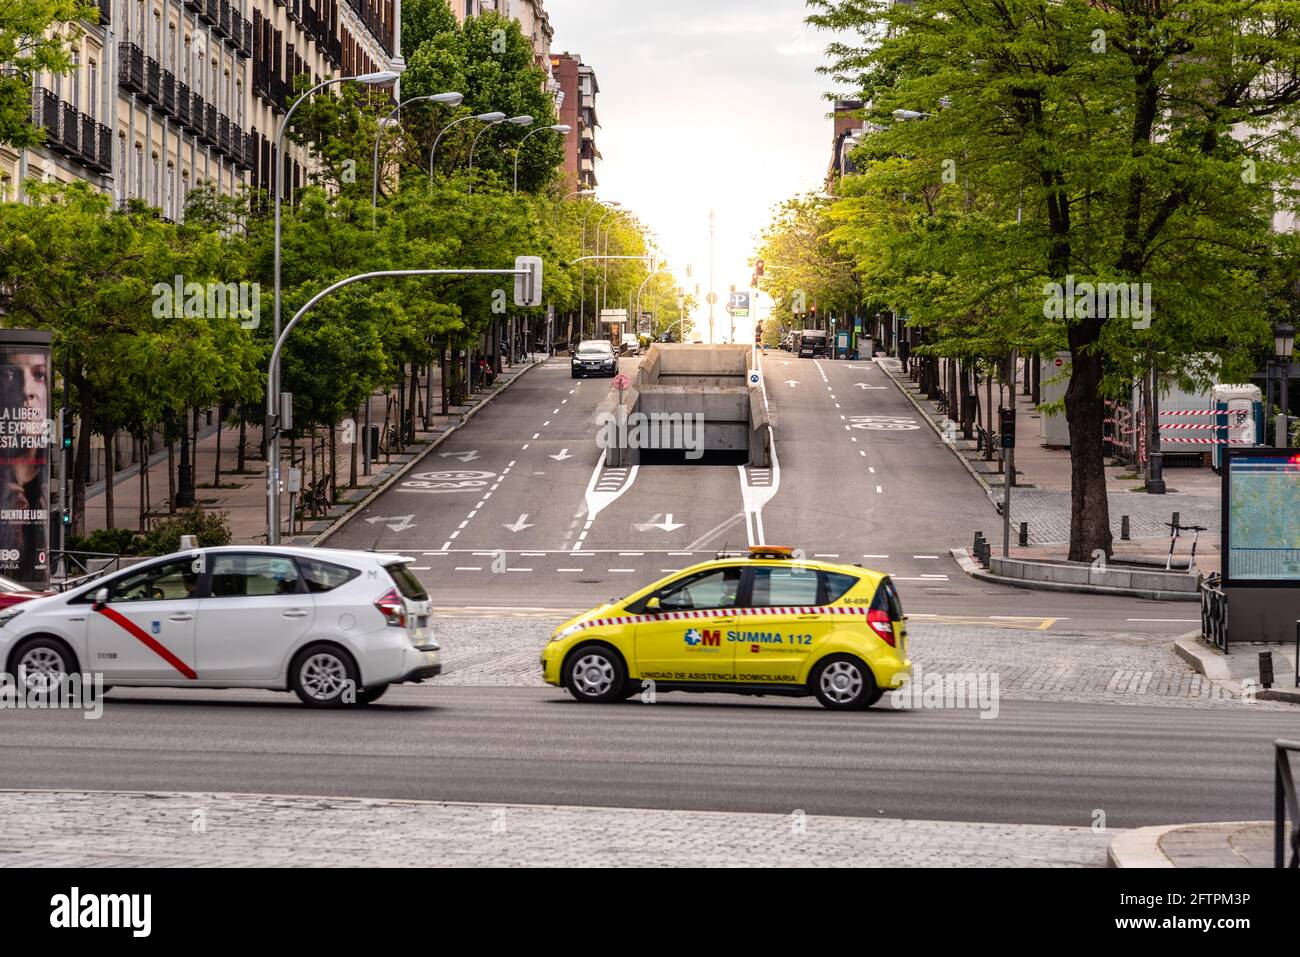 Madrid, Spain - May 1, 2021: Summa 112 health services car crossing Castellana Avenue in Madrid during covid-19 pandemic in the early morning. Sun ove Stock Photo